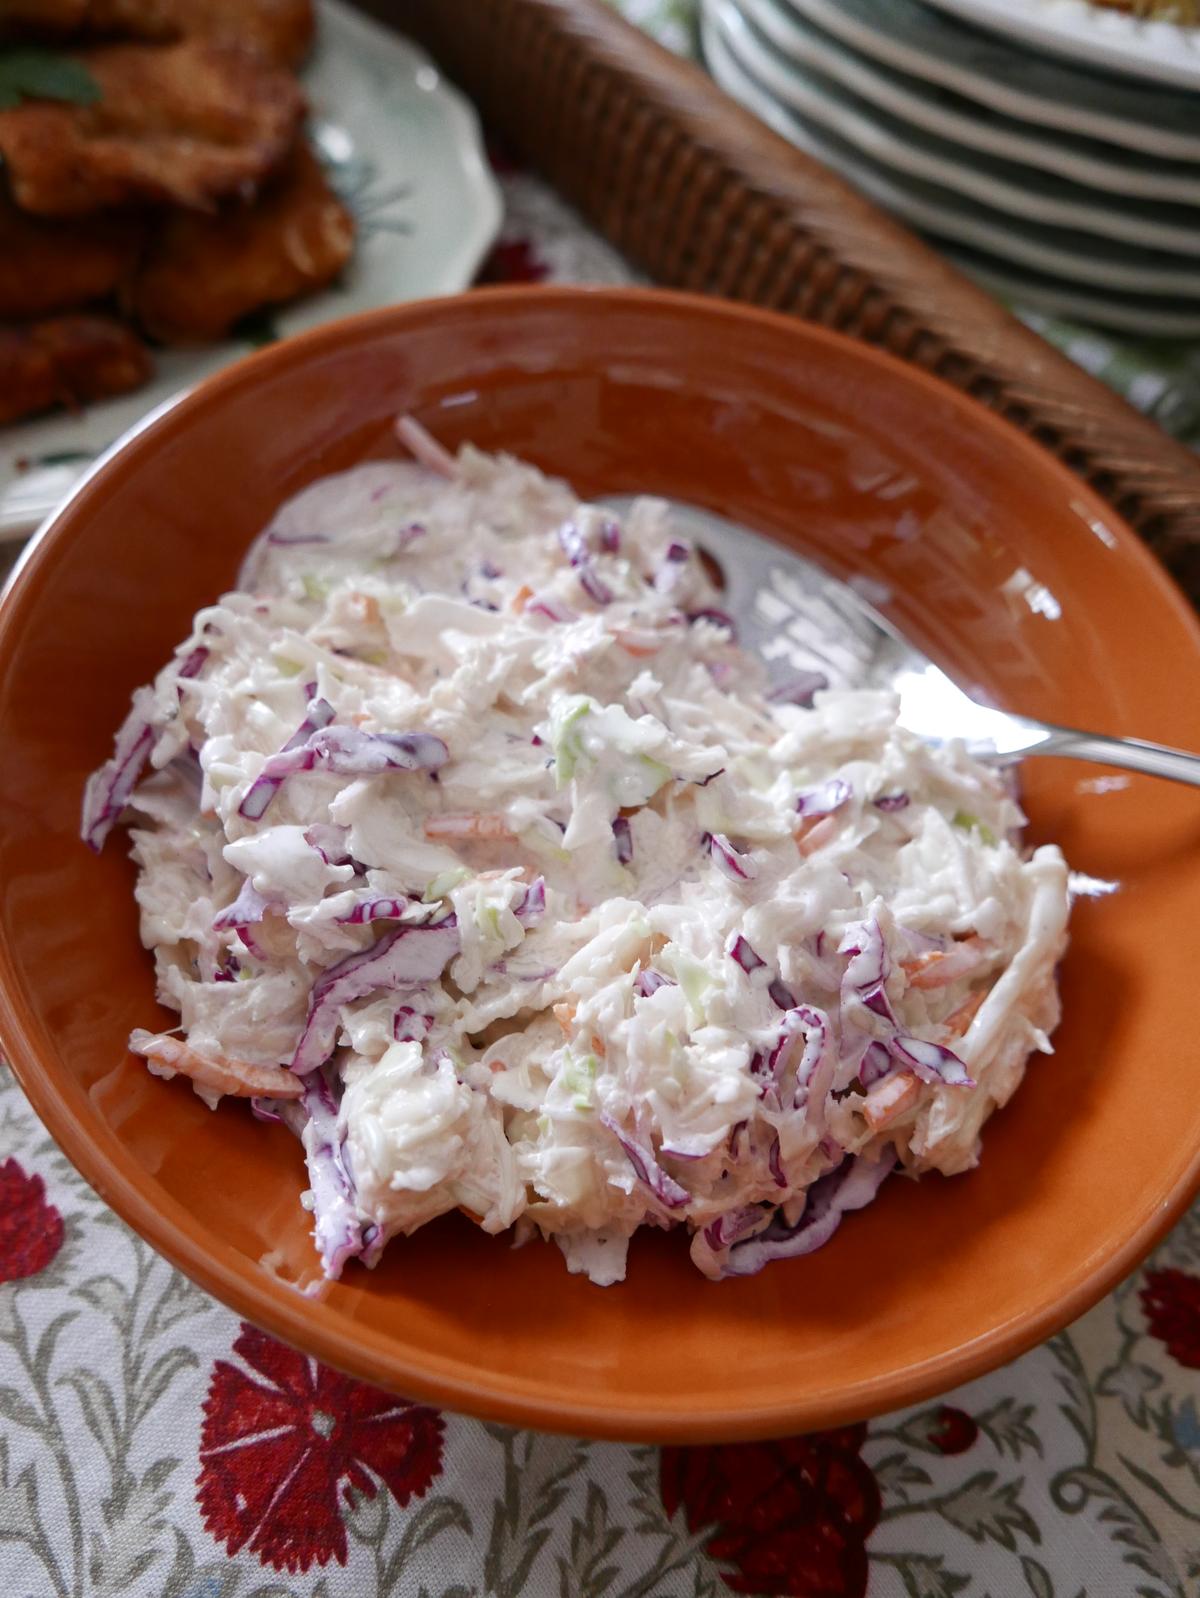 Pre-sliced bagged coleslaw mix makes this classic side a breeze to throw together. (Victoria de la Maza)